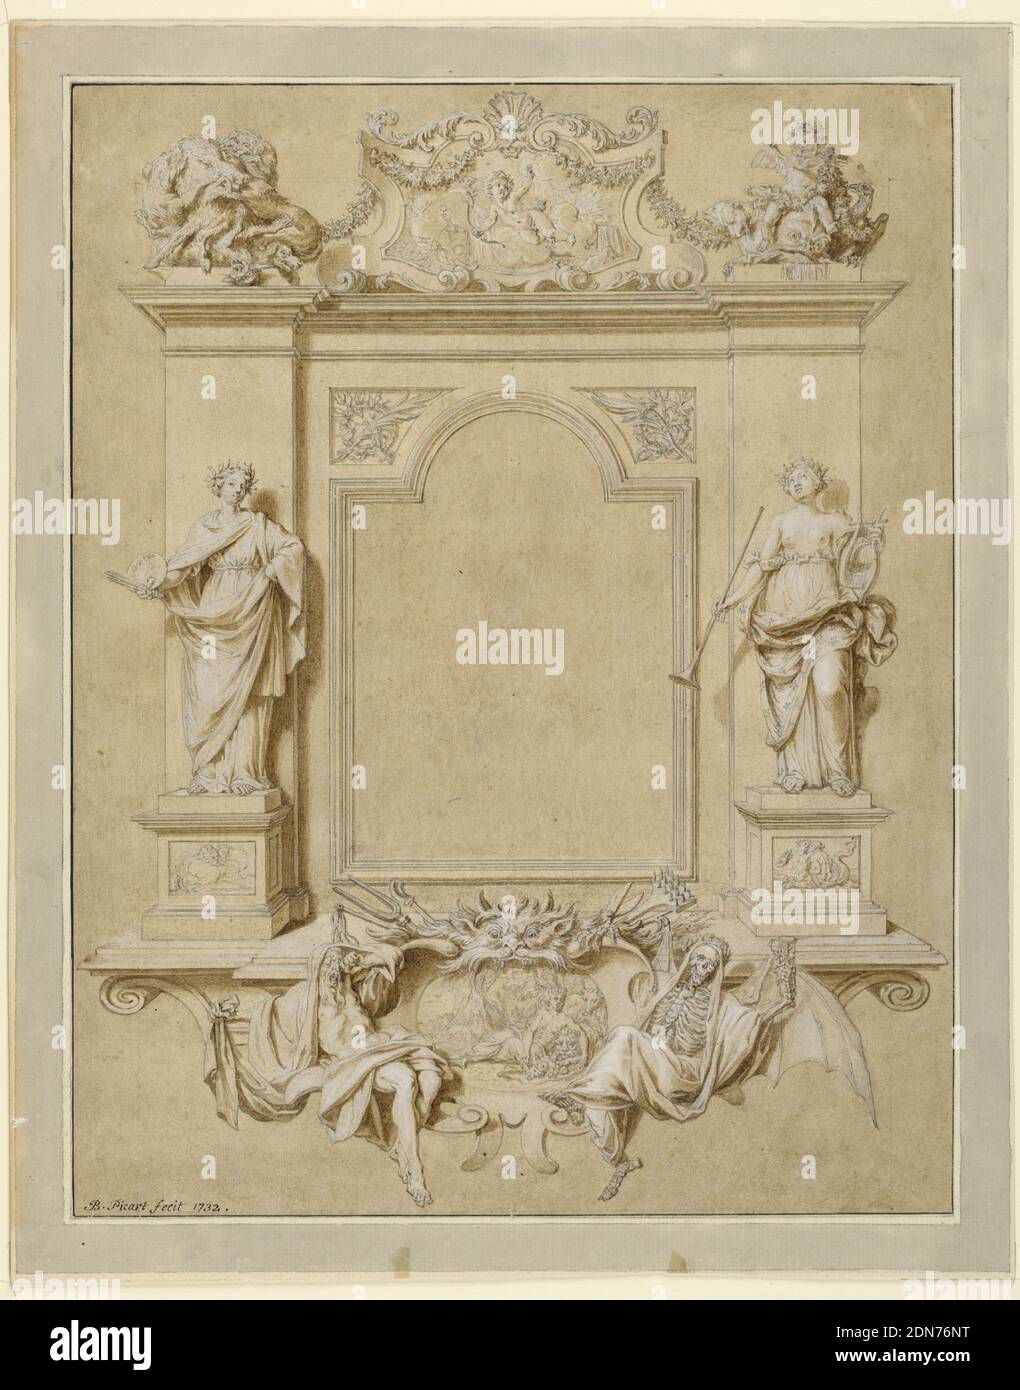 Memorial Panel Depicting Painting and Music, Pen and black ink, brush and brown wash and white gouache, black chalk, A tablet contains an imaginative picture frame in the central park. It is flanked by pilasters, in front of which the statues of 'Painting' and 'Music' stand. Below, in the center, is an escutcheon, showing a representation of 'Cybele'; it is supported by 'Saturnus' and 'Death,' Above the entablature is an escutcheon with Cupid, flanked by a boar and dogs, at left, and a putto upon a dolphin, and other animals, at right. Colored background, framing line., France, 1732, Drawing Stock Photo